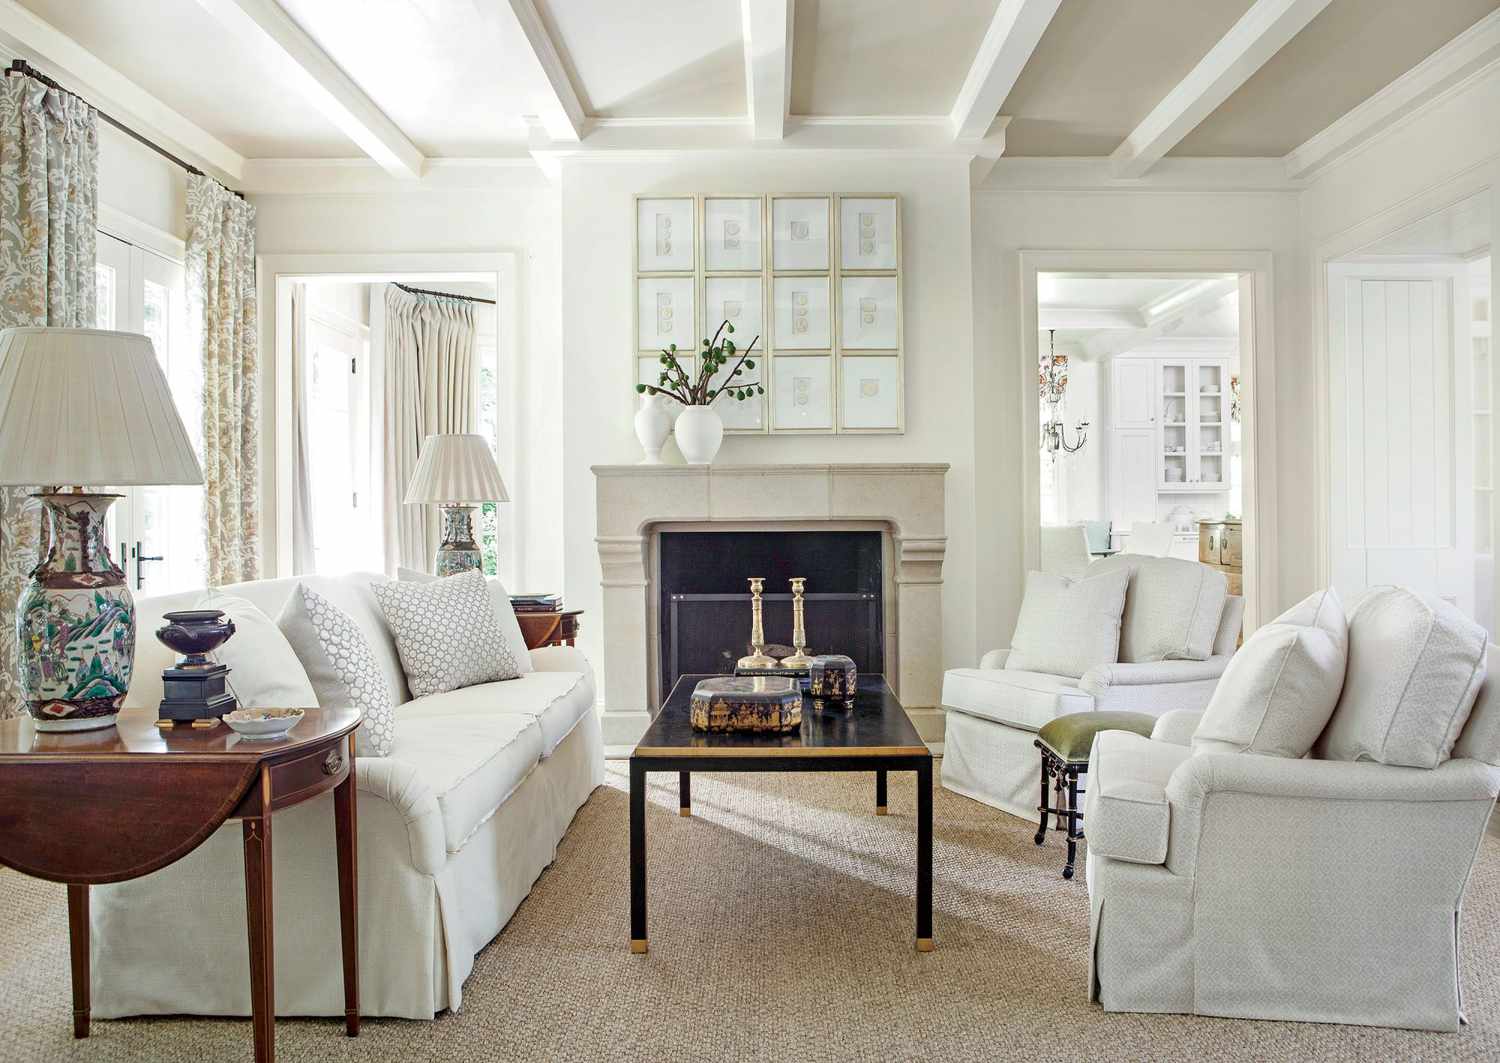 Best White Paints for Trim to Make Your Home Shine